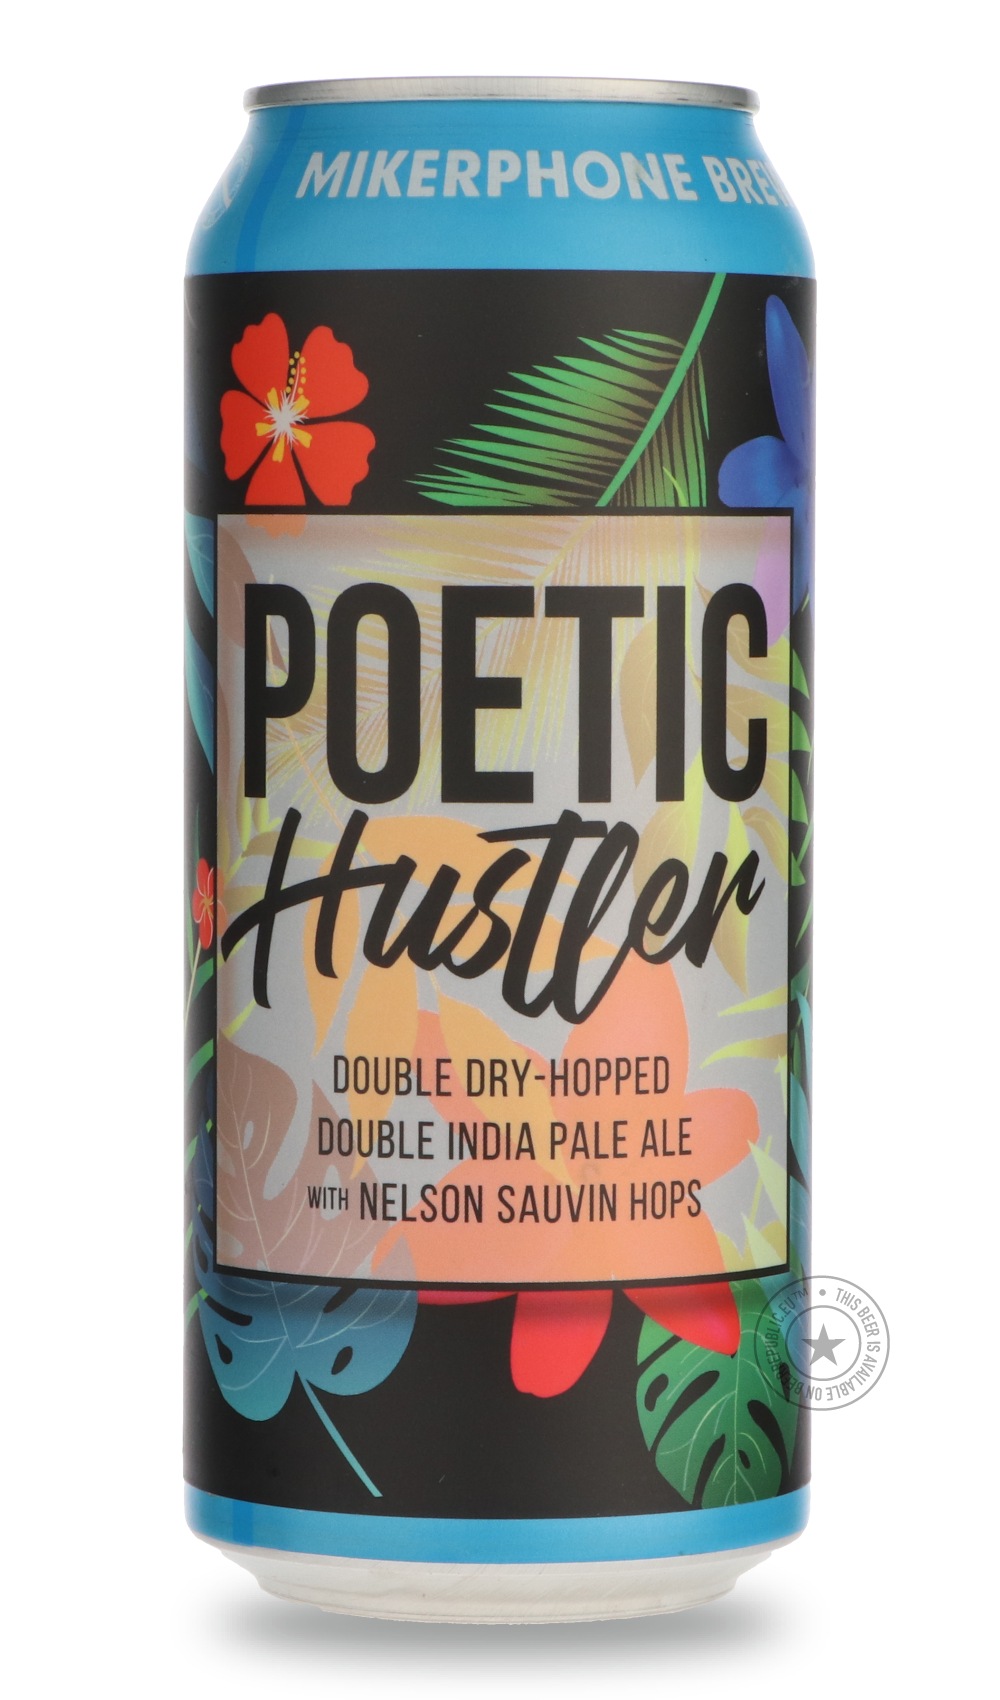 -Mikerphone- Poetic Hustler-IPA- Only @ Beer Republic - The best online beer store for American & Canadian craft beer - Buy beer online from the USA and Canada - Bier online kopen - Amerikaans bier kopen - Craft beer store - Craft beer kopen - Amerikanisch bier kaufen - Bier online kaufen - Acheter biere online - IPA - Stout - Porter - New England IPA - Hazy IPA - Imperial Stout - Barrel Aged - Barrel Aged Imperial Stout - Brown - Dark beer - Blond - Blonde - Pilsner - Lager - Wheat - Weizen - Amber - Barle